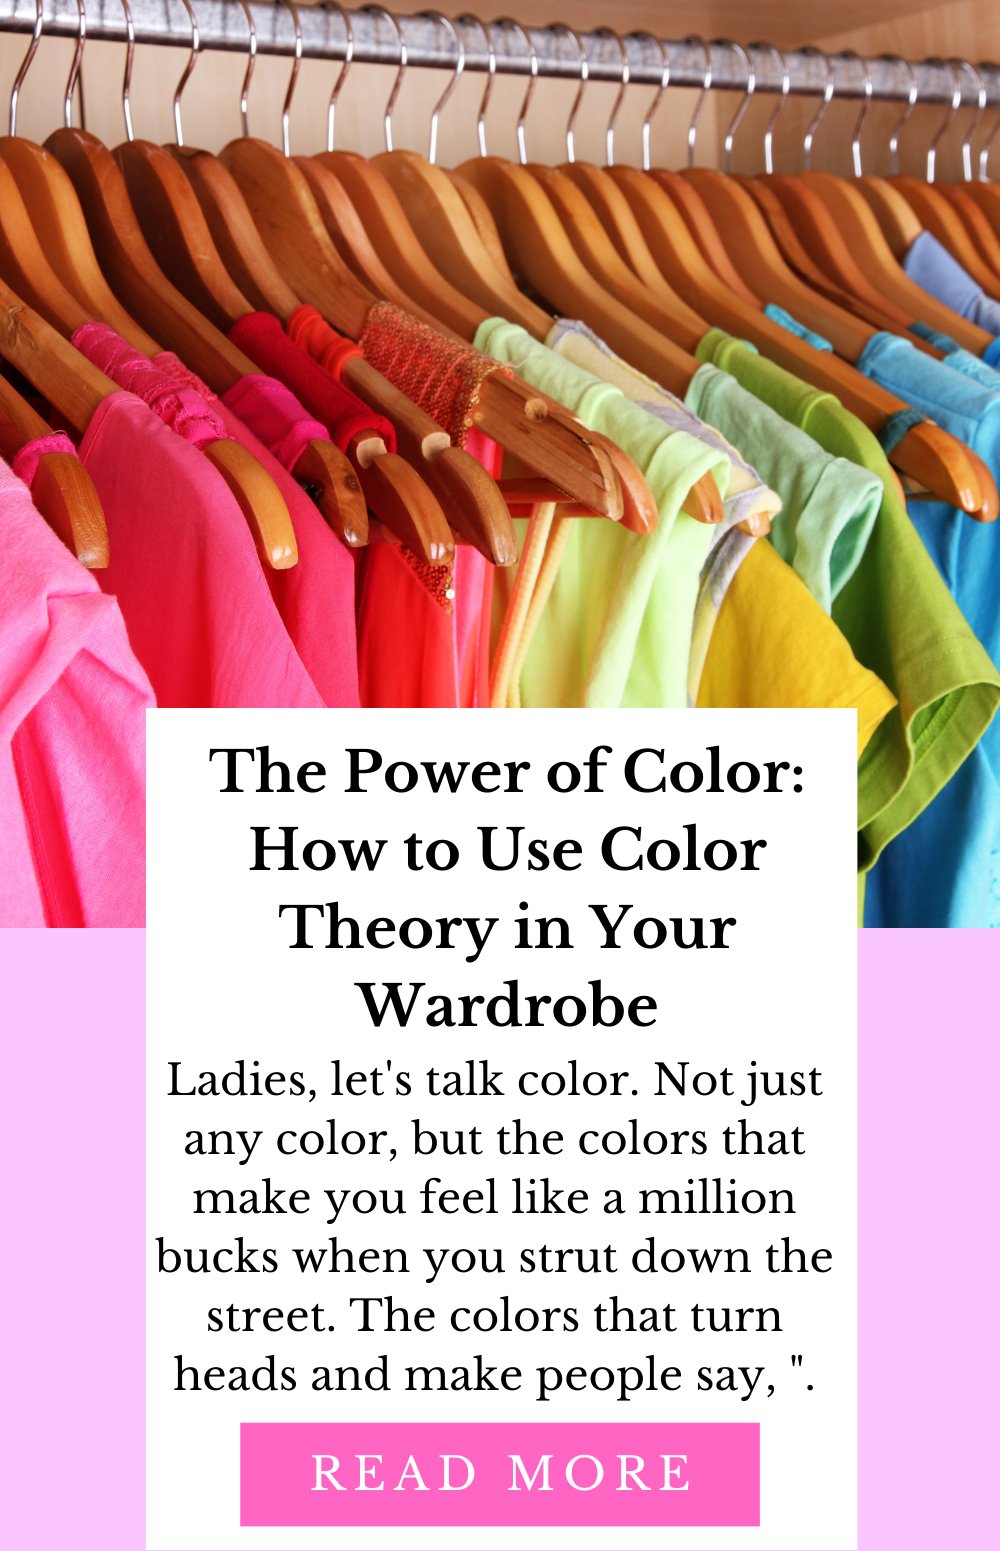 The Power of Color: How to Use Color Theory in Your Wardrobe - TGC Boutique